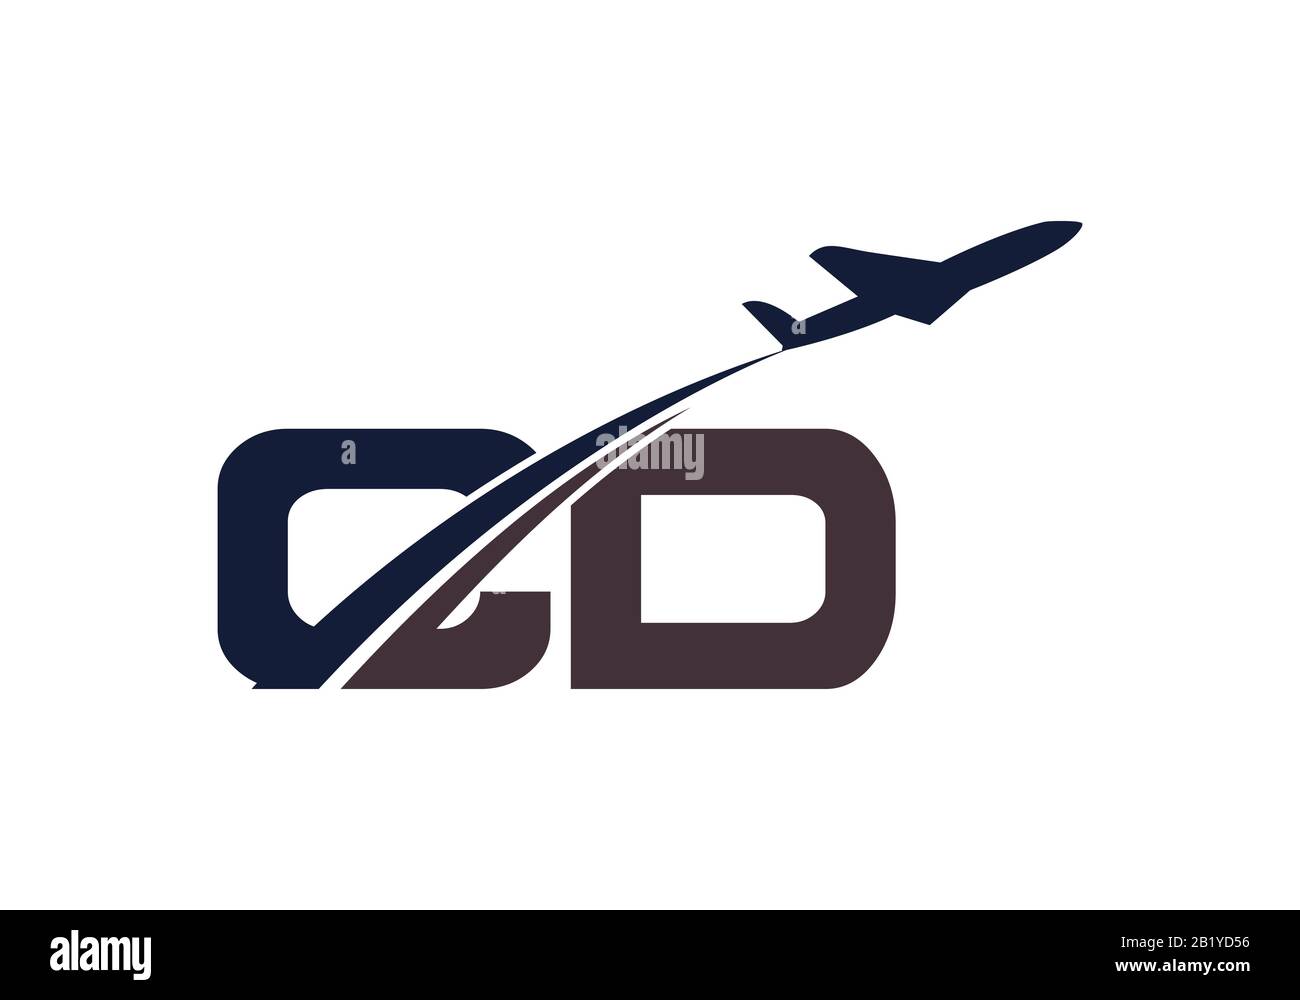 Initial Letter C and D  with Aviation Logo Design, Air, Airline, Airplane and Travel Logo template. Stock Vector